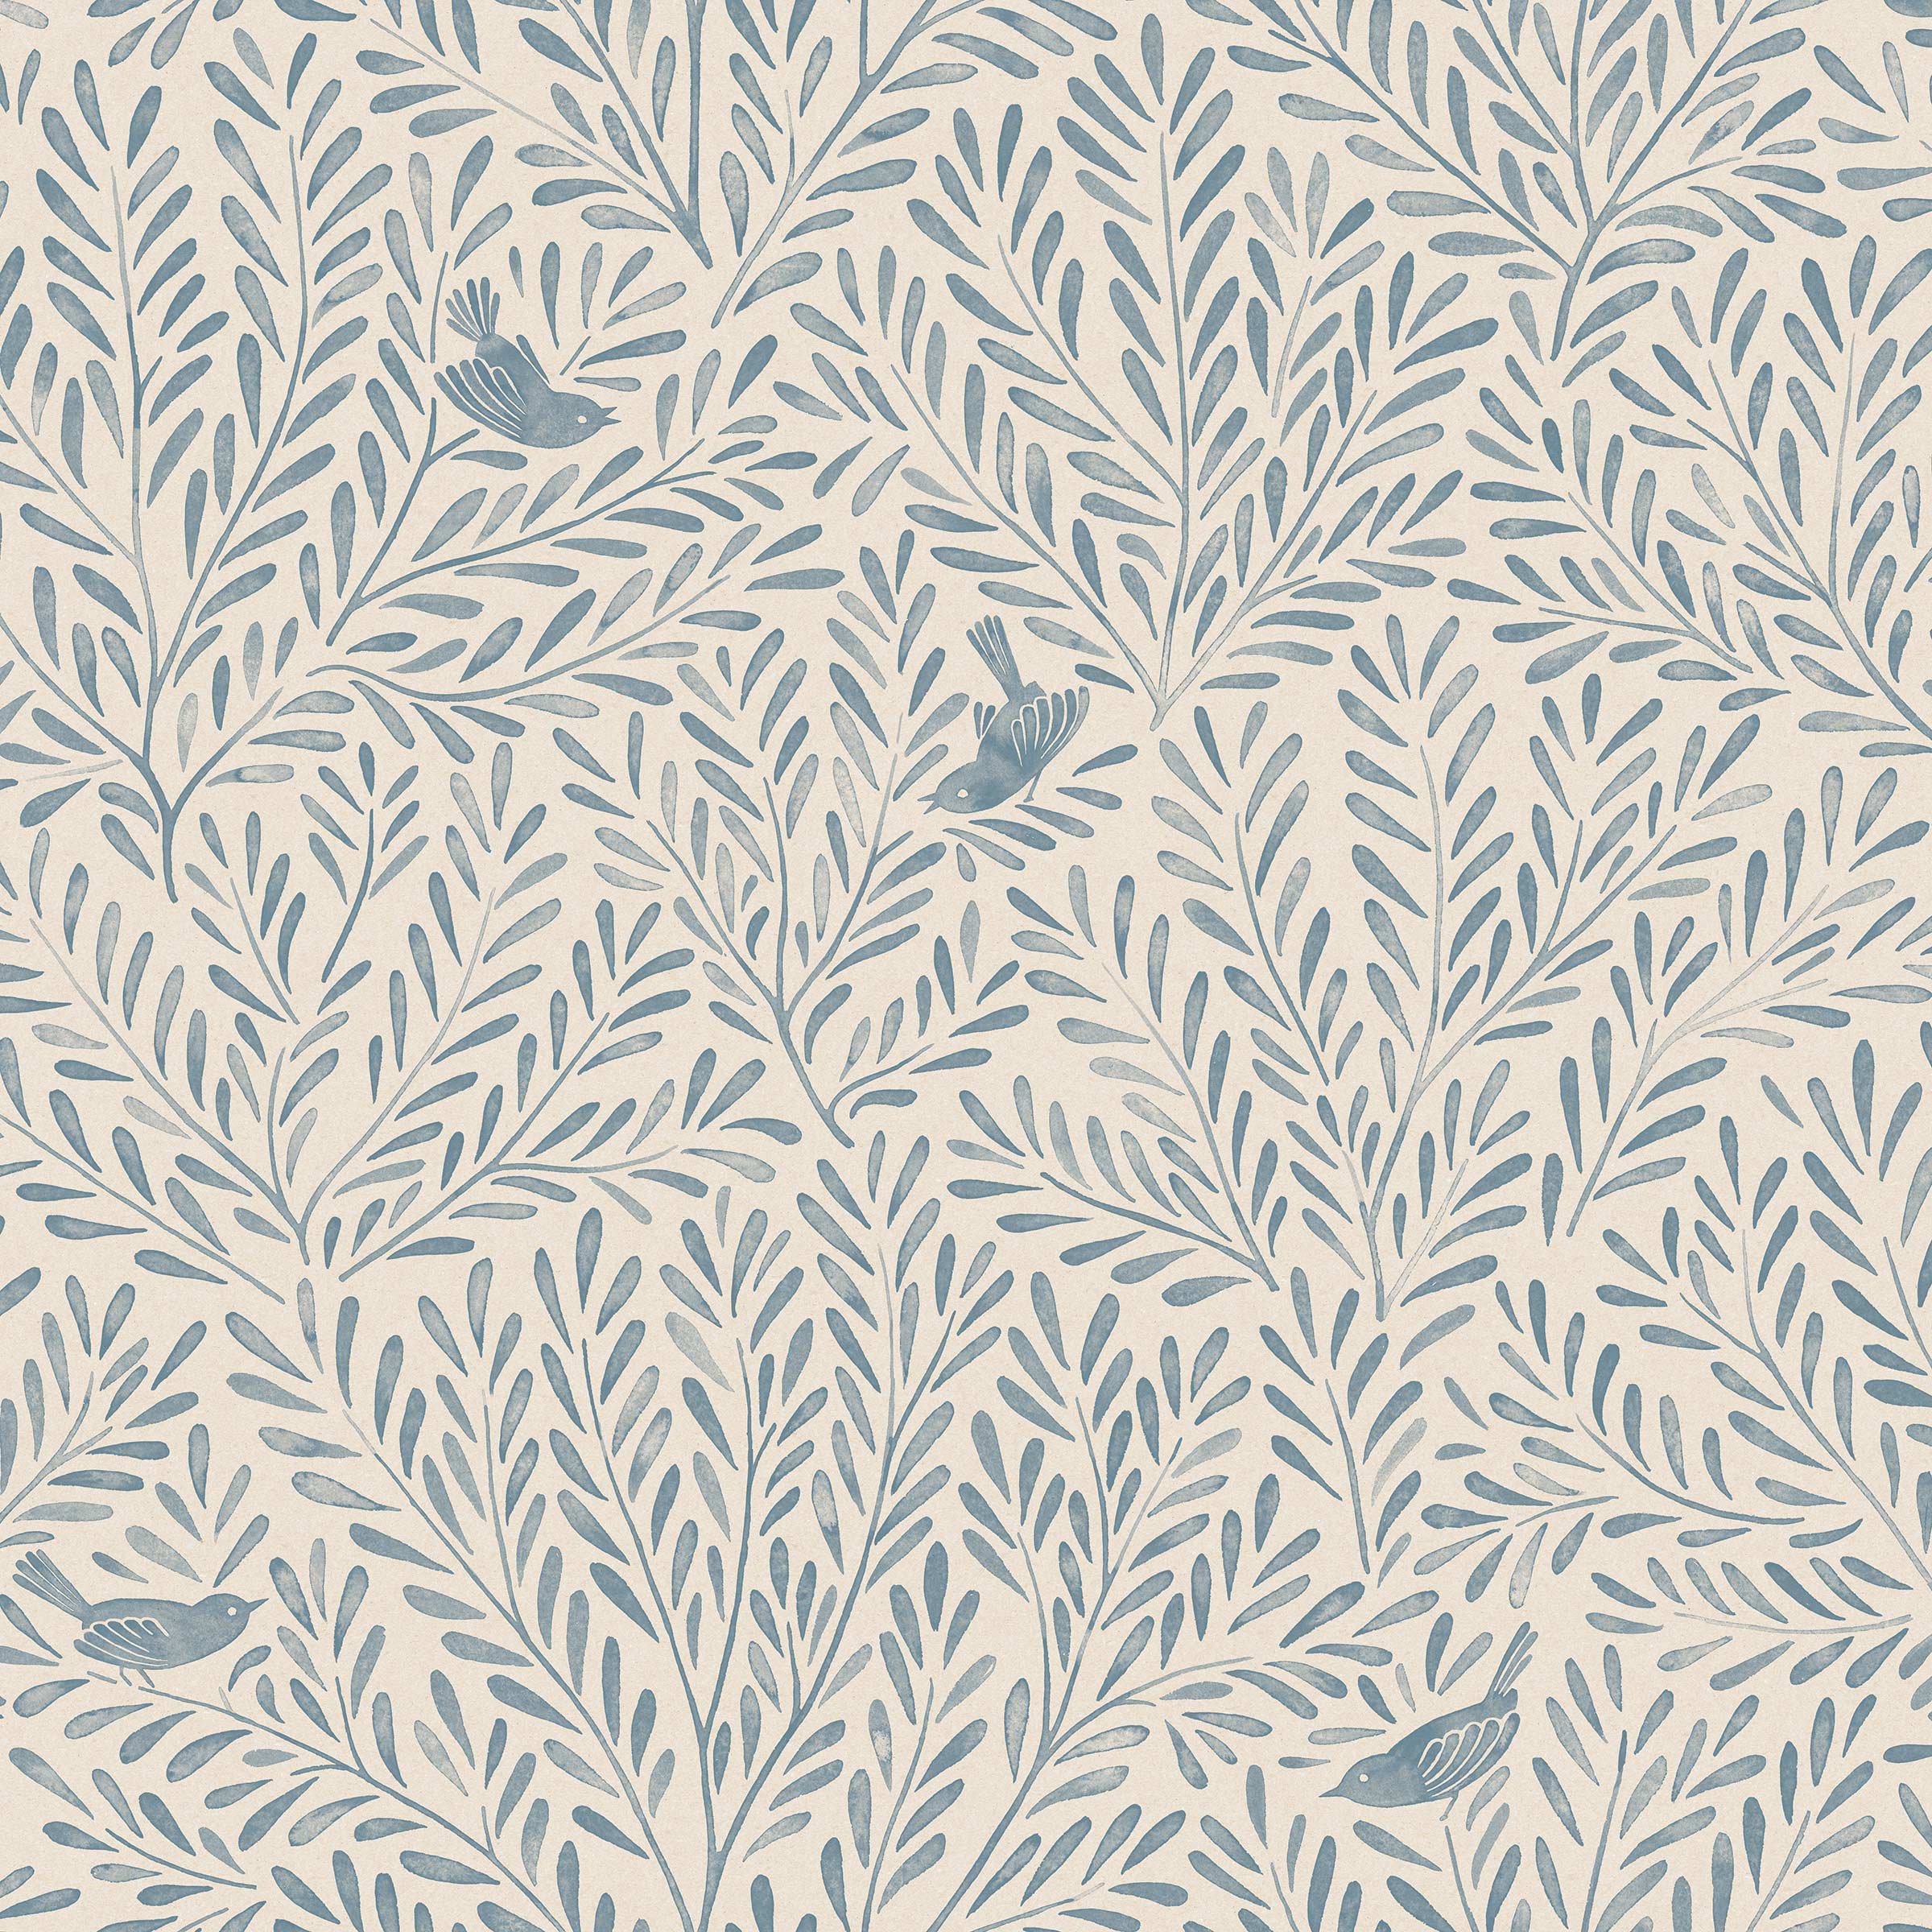 Detail of wallpaper in a playful bird and leaf print in blue on a white field.